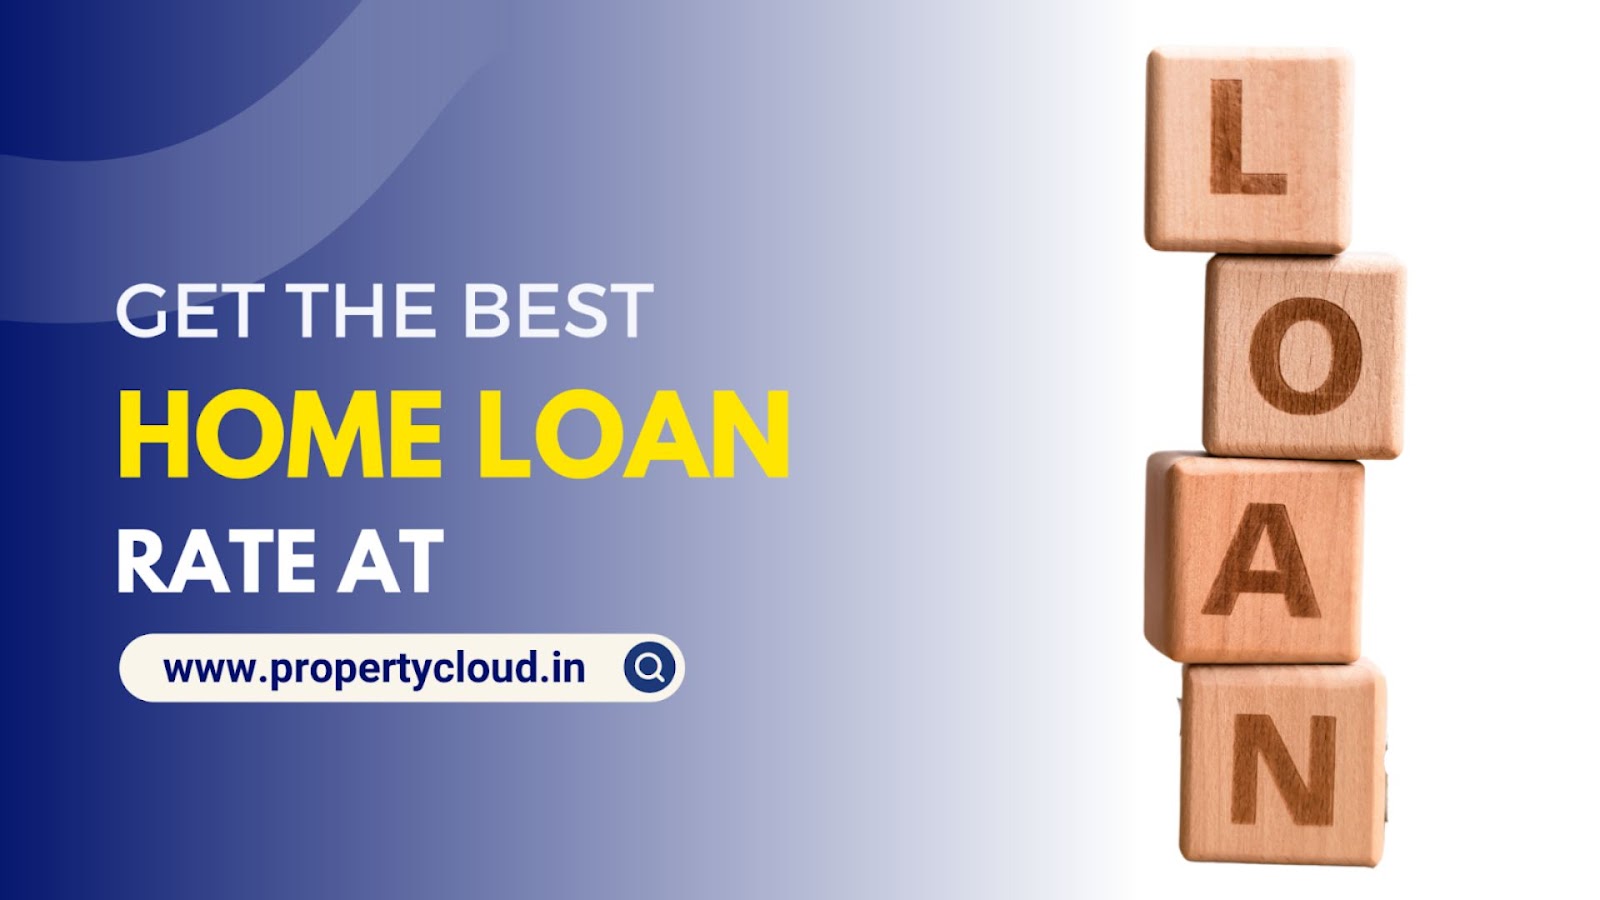 Reach out to PropertyCloud for your home loan needs, they specialize in helping NRIs secure loans for their dream homes in India.